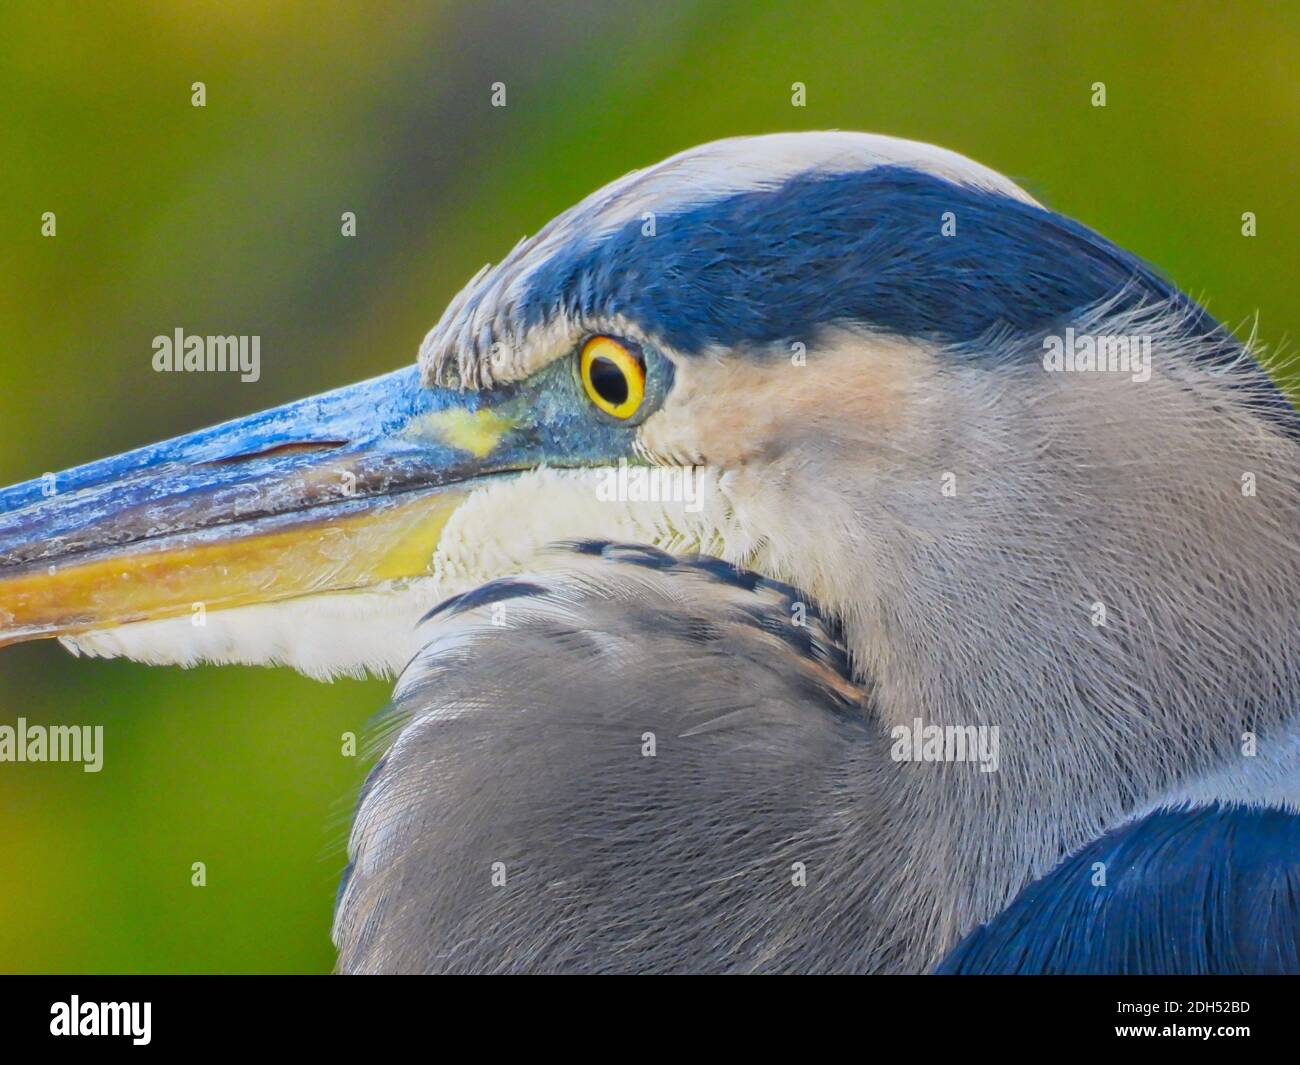 Closeup great blue heron: Fall wildlife with closeup view of a great blue heron bird with blue feathers, yellow bill and yellow eyes with autumn color Stock Photo